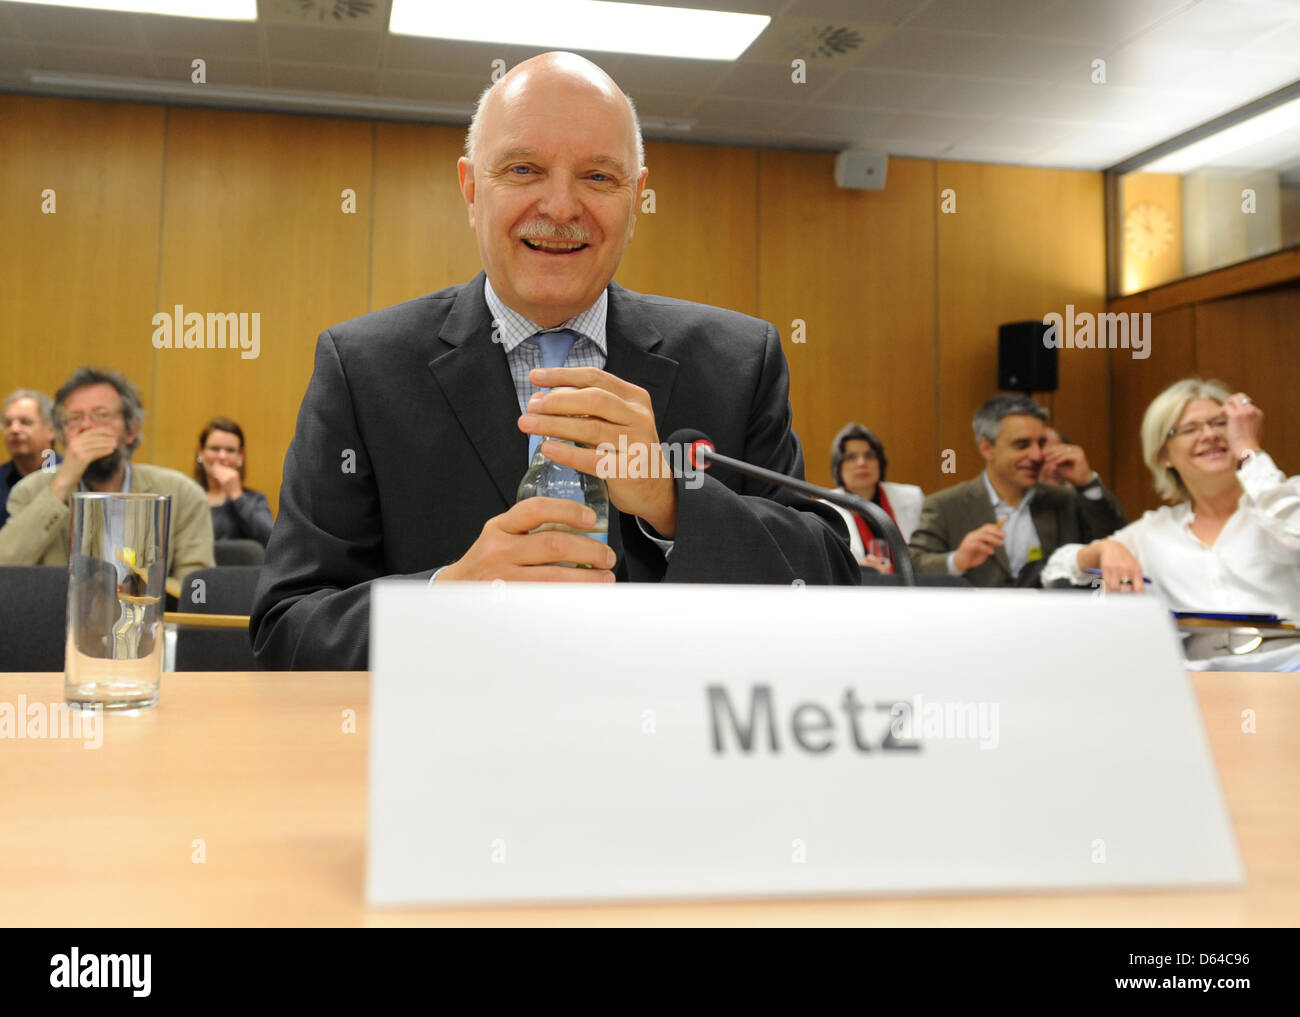 Communications counselor Dirk Metz takes the witness stand before the EnBW inquiry committee at the Landtag (state parliament) in Stuttgart, Germany, 25 May 2012. Metz was the Media Counselor of the former Minister-President of Baden-Wuerttemberg, Stefan Mappus. Photo: FRANZISKA KRAUFMANN Stock Photo